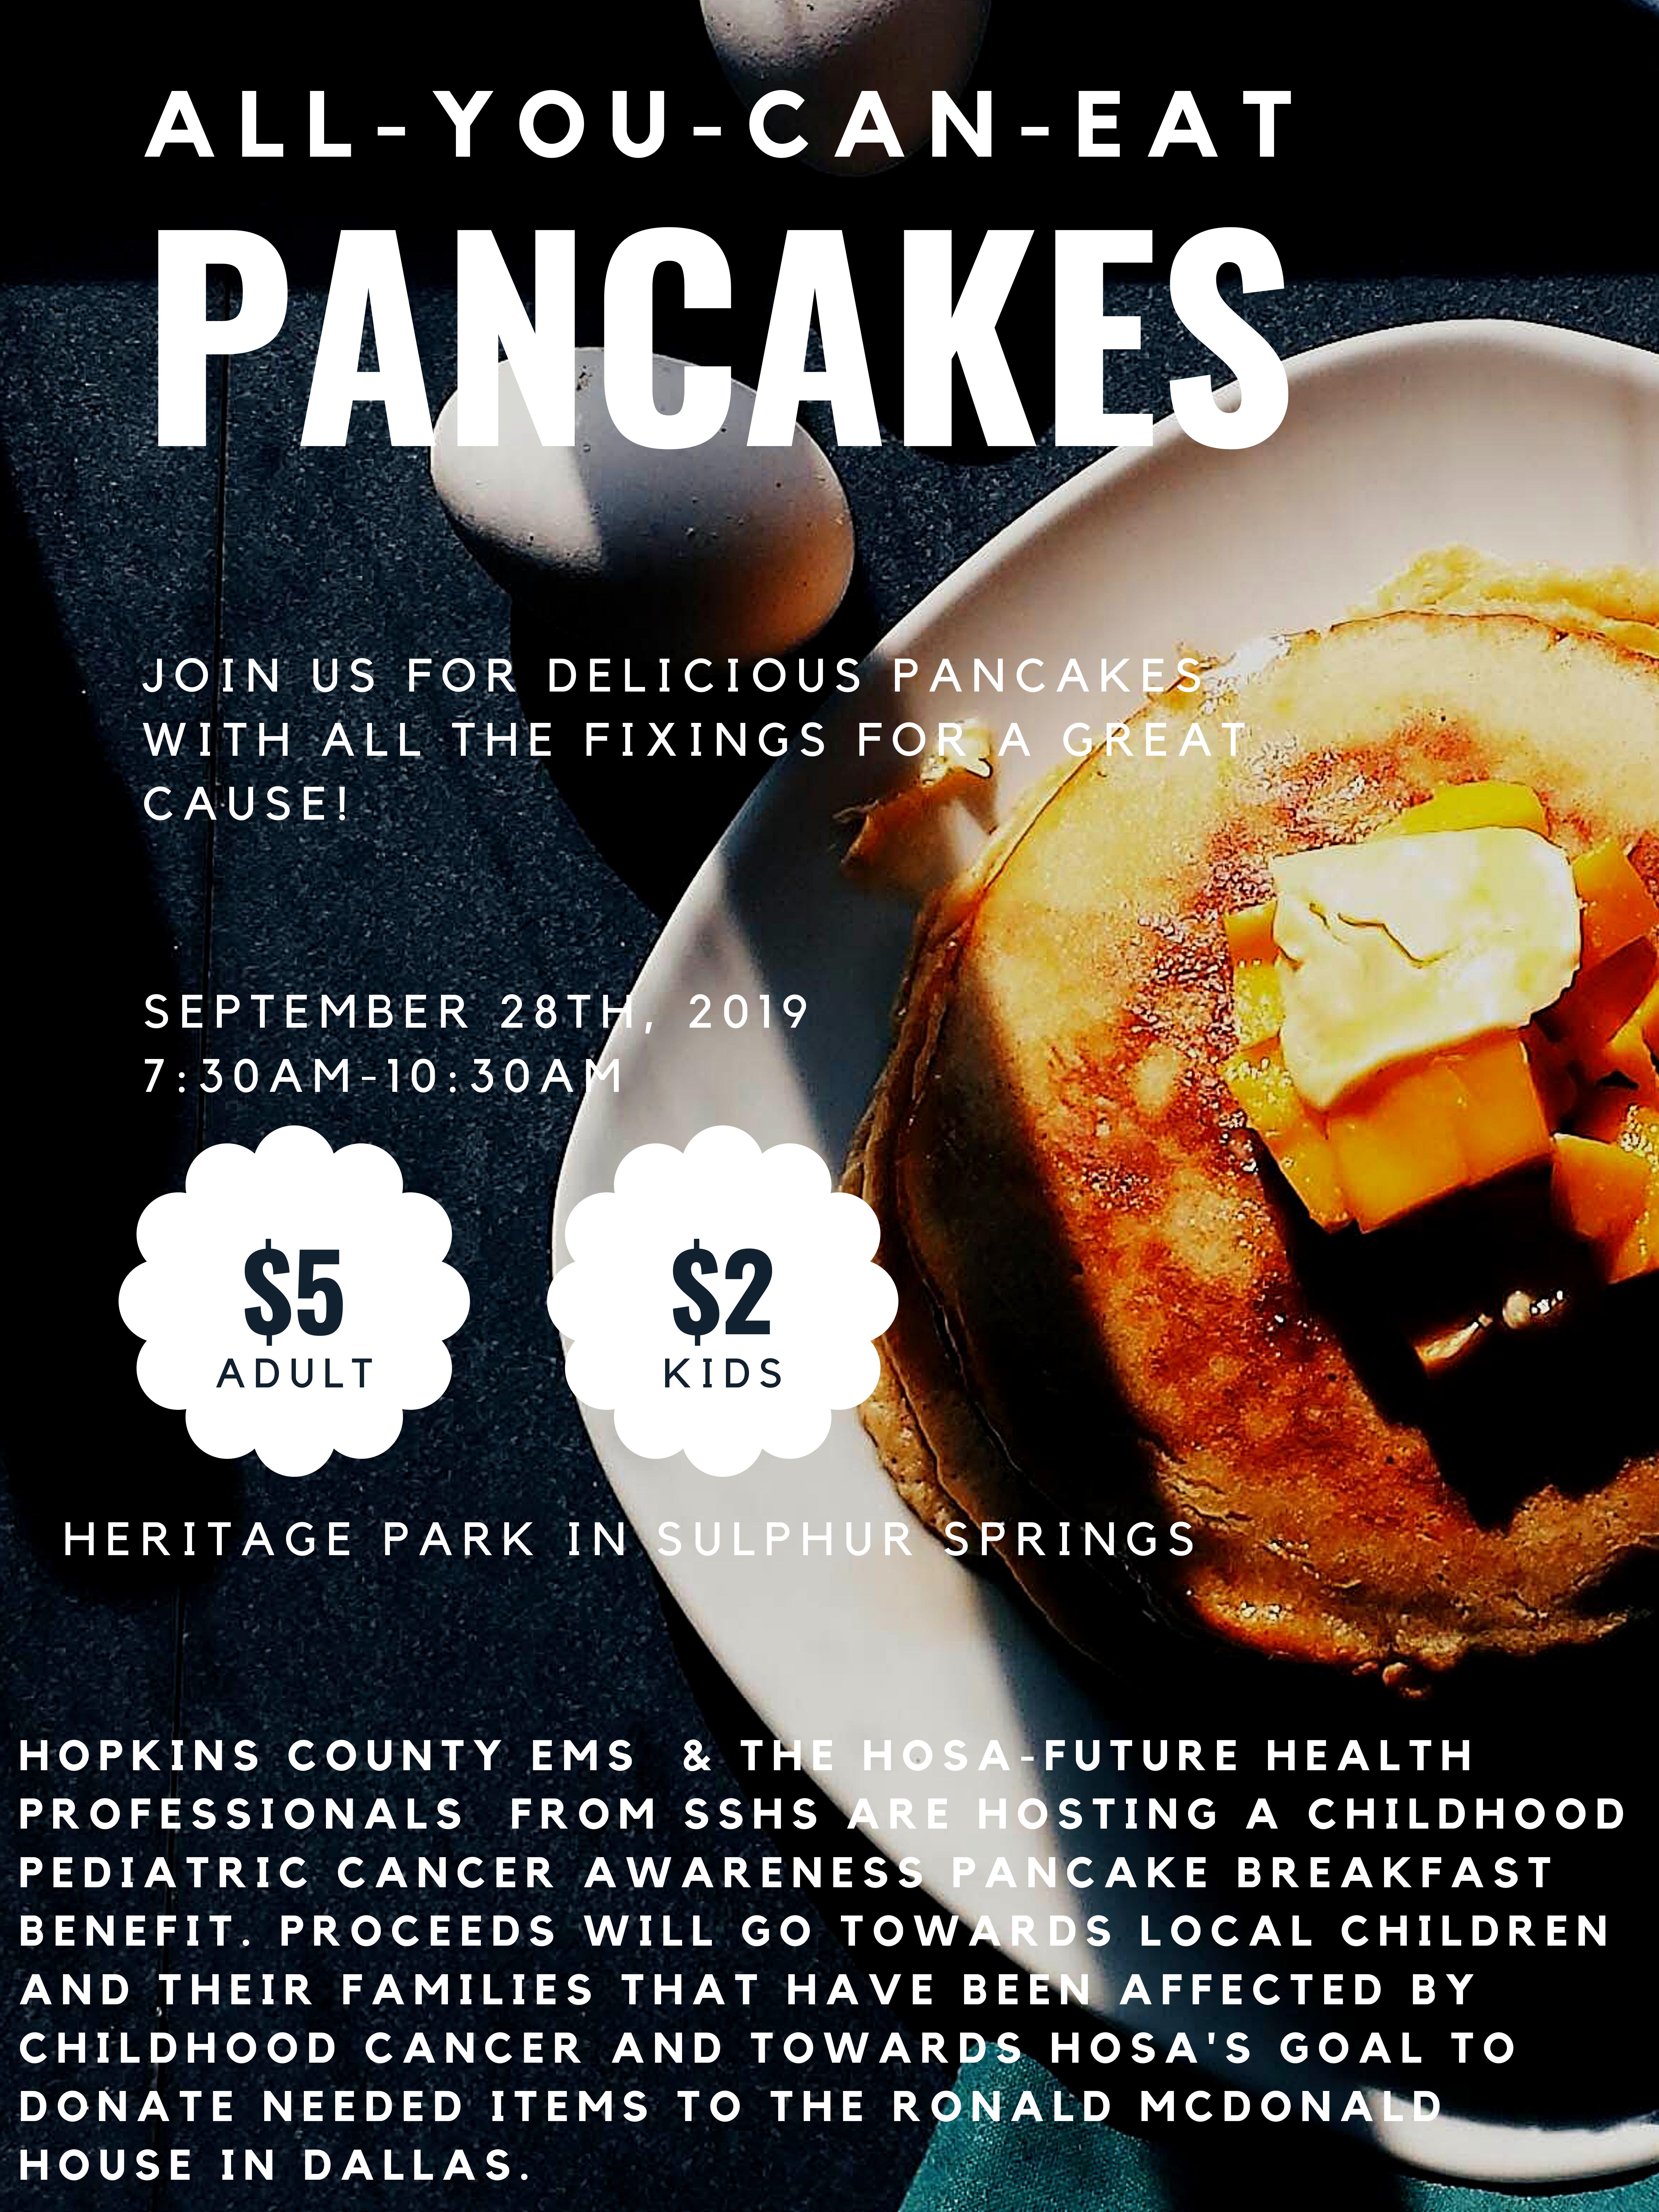 Hopkins County EMS and the HOSA-Future Health Professionals from SSHS Hosting All-You-Can-Eat Pancake Breakfast on Saturday, September 28th